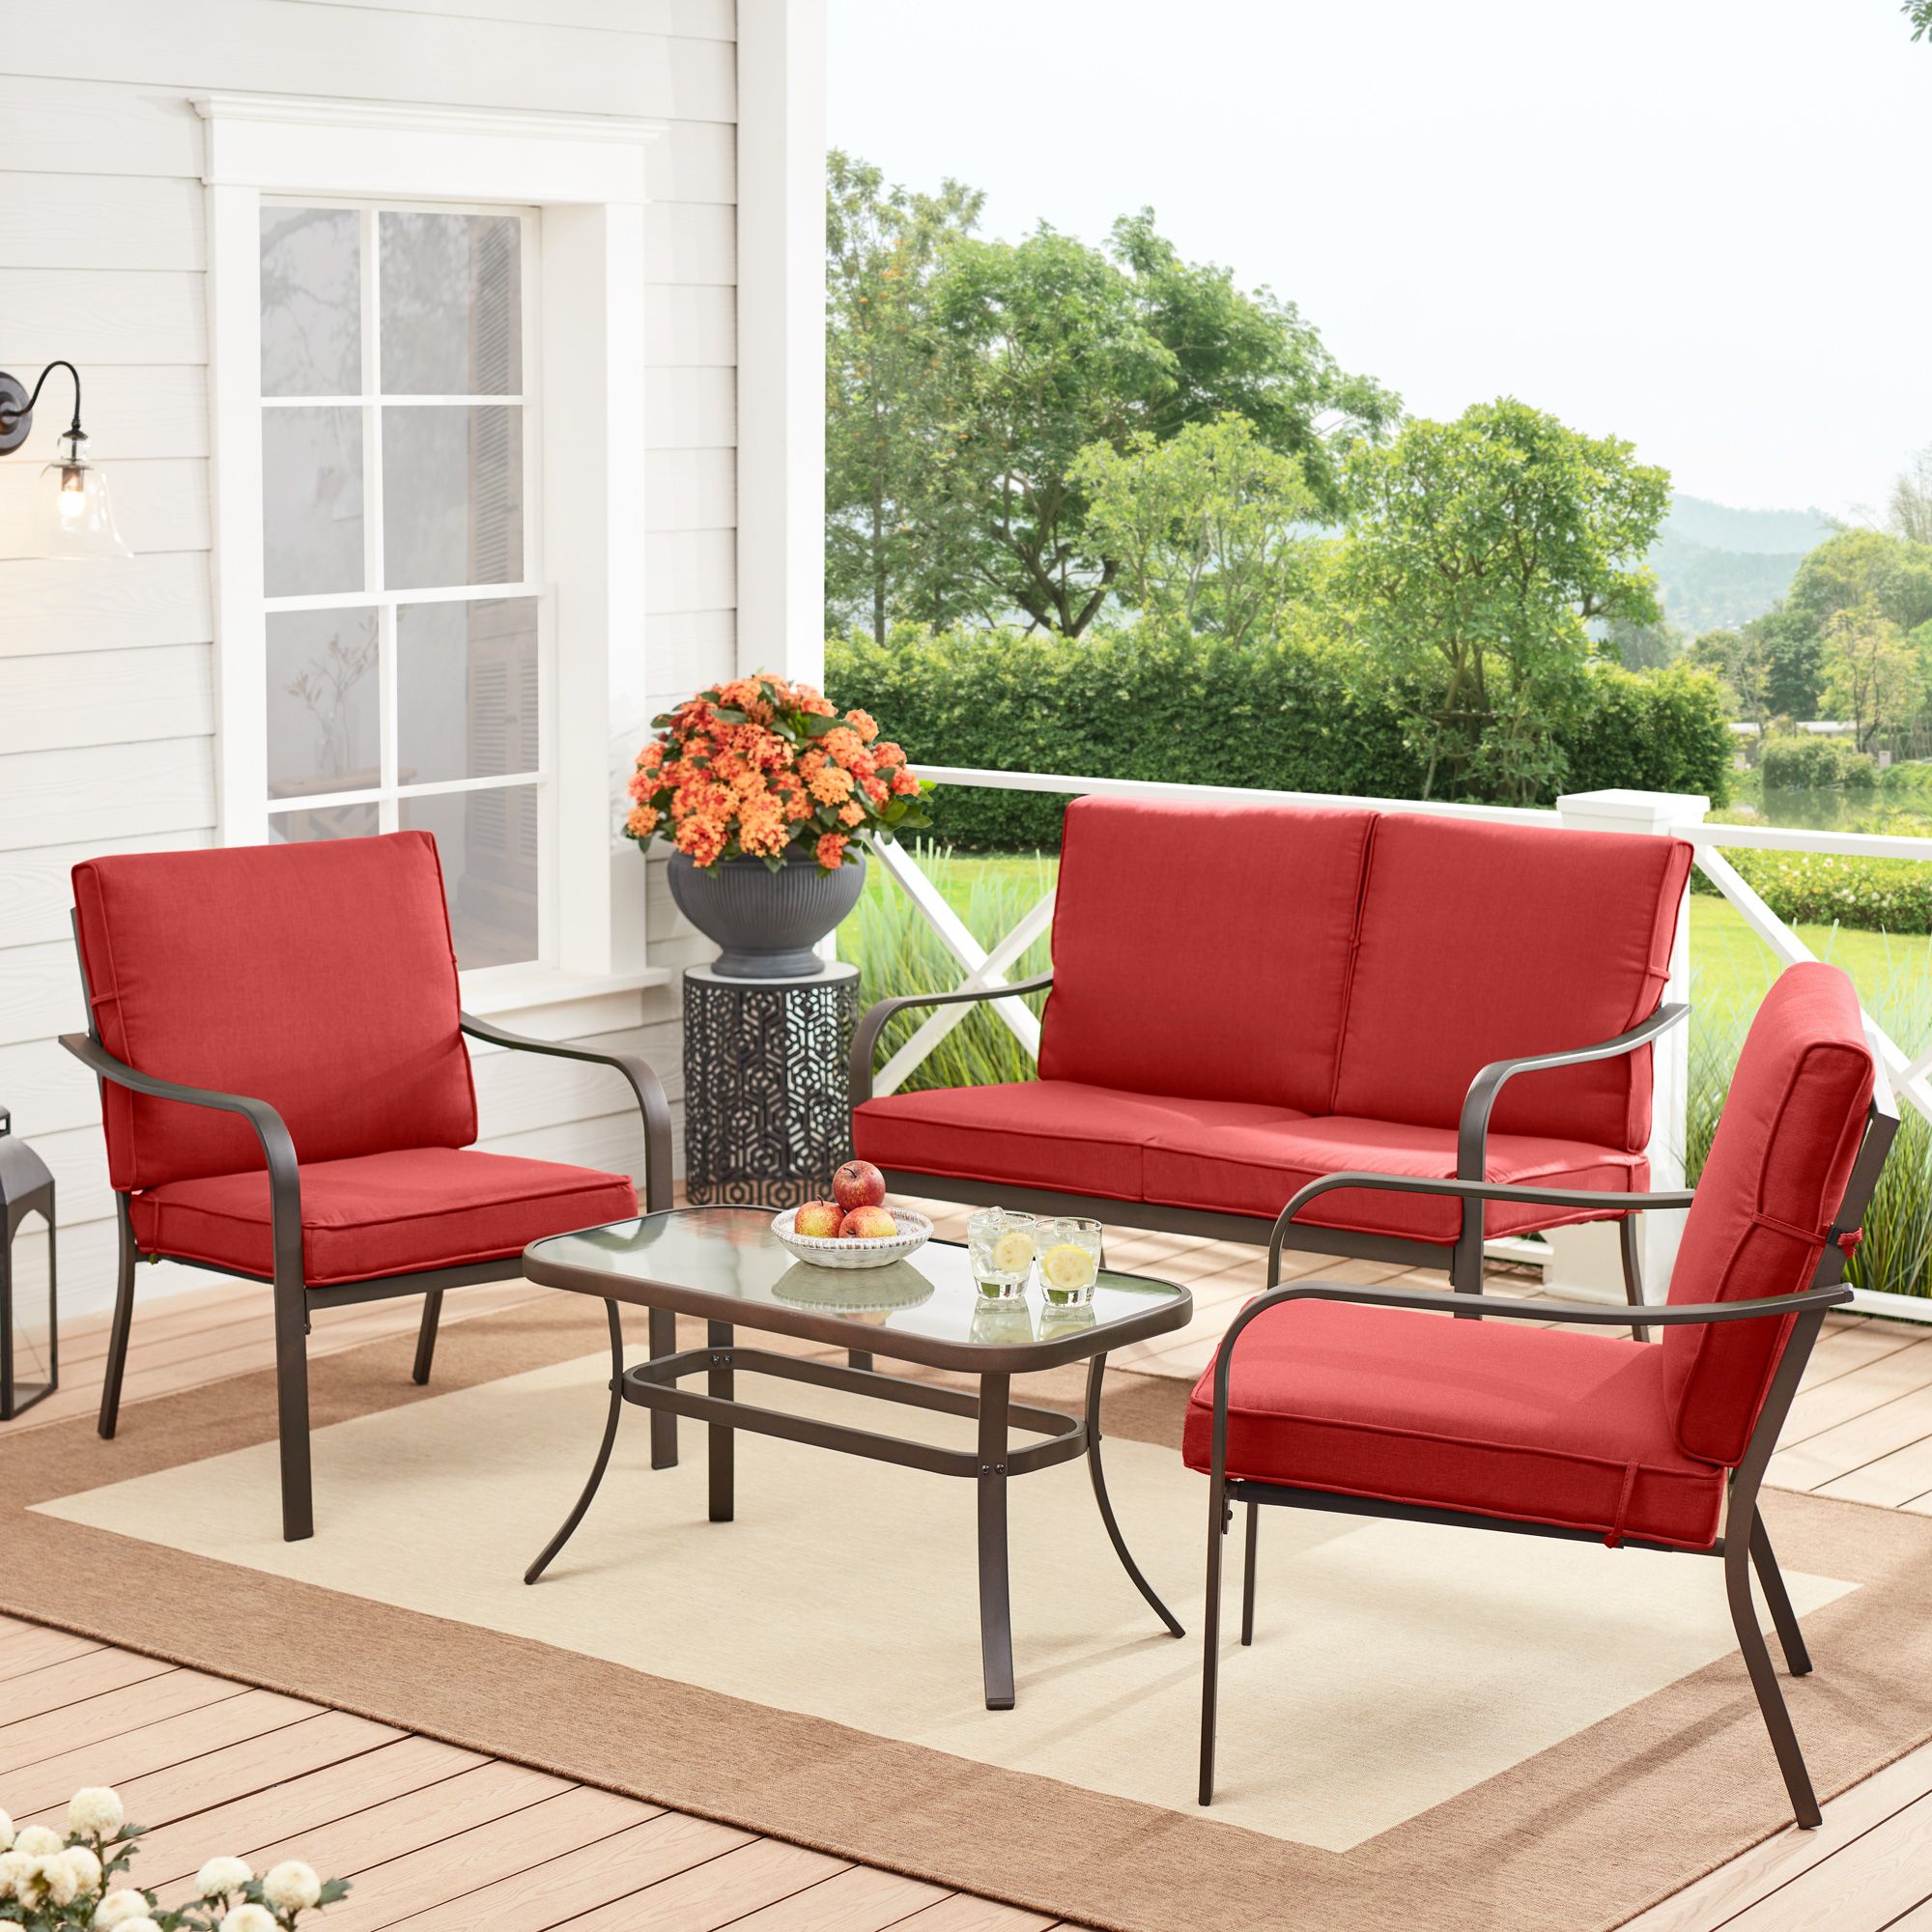 Mainstays Stanton 4 Piece Outdoor Patio Conversation Set, Red – Walmart Pertaining To 4 Piece Gray Outdoor Patio Seating Sets (View 9 of 15)